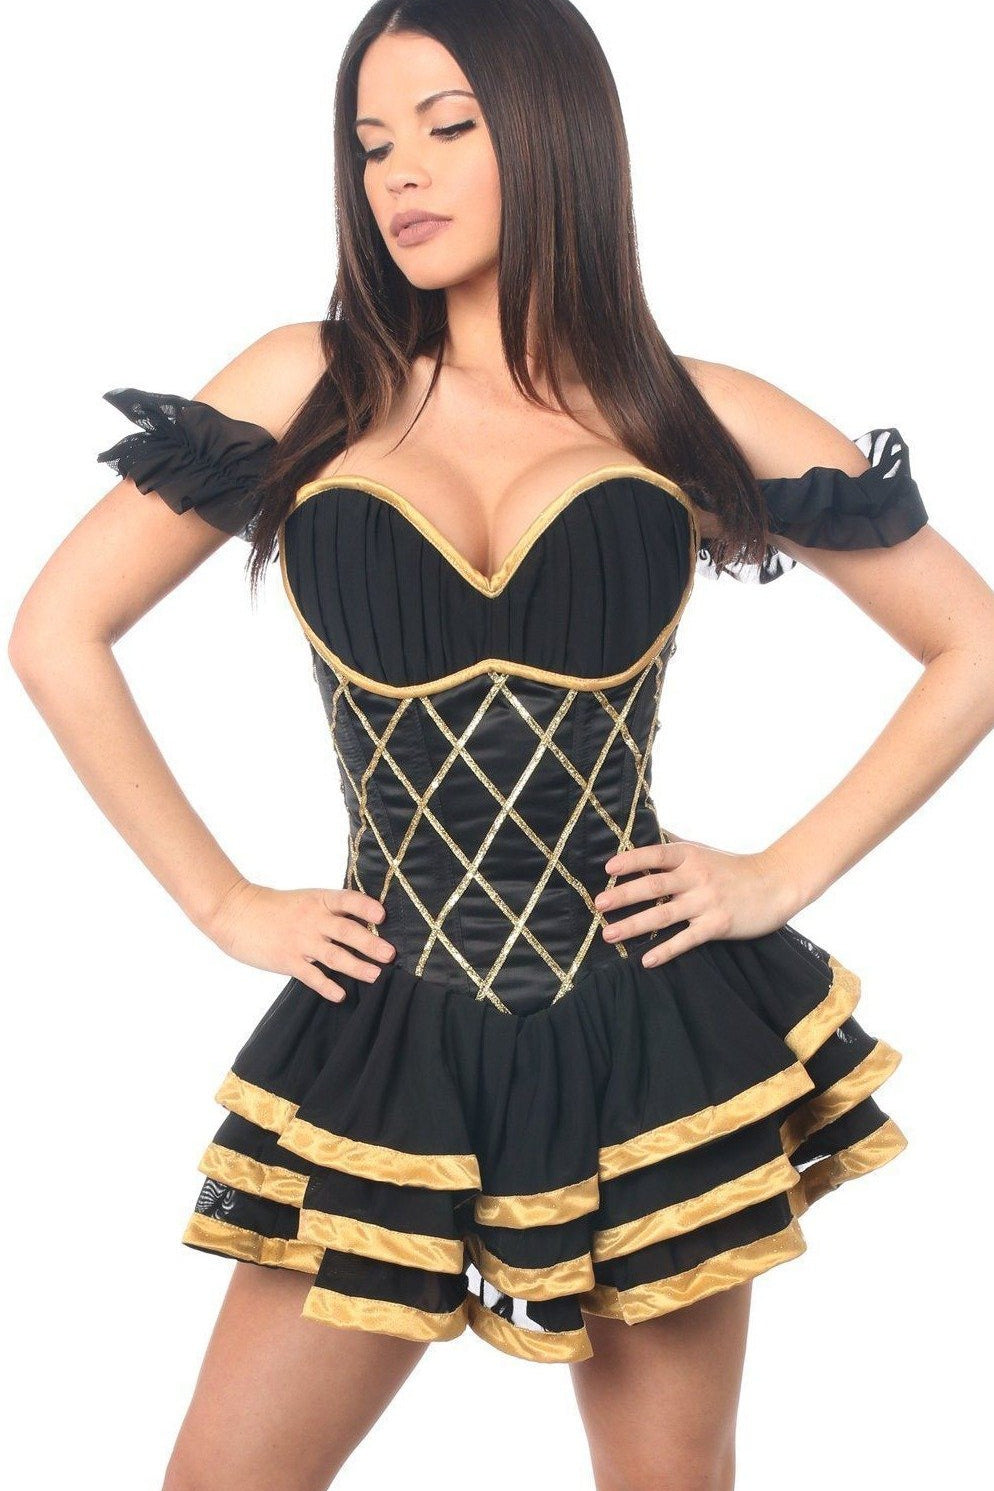 Top Drawer Plus Size Steel Boned Egyptian Corseted Dress-Daisy Corsets-SEXYSHOES.COM